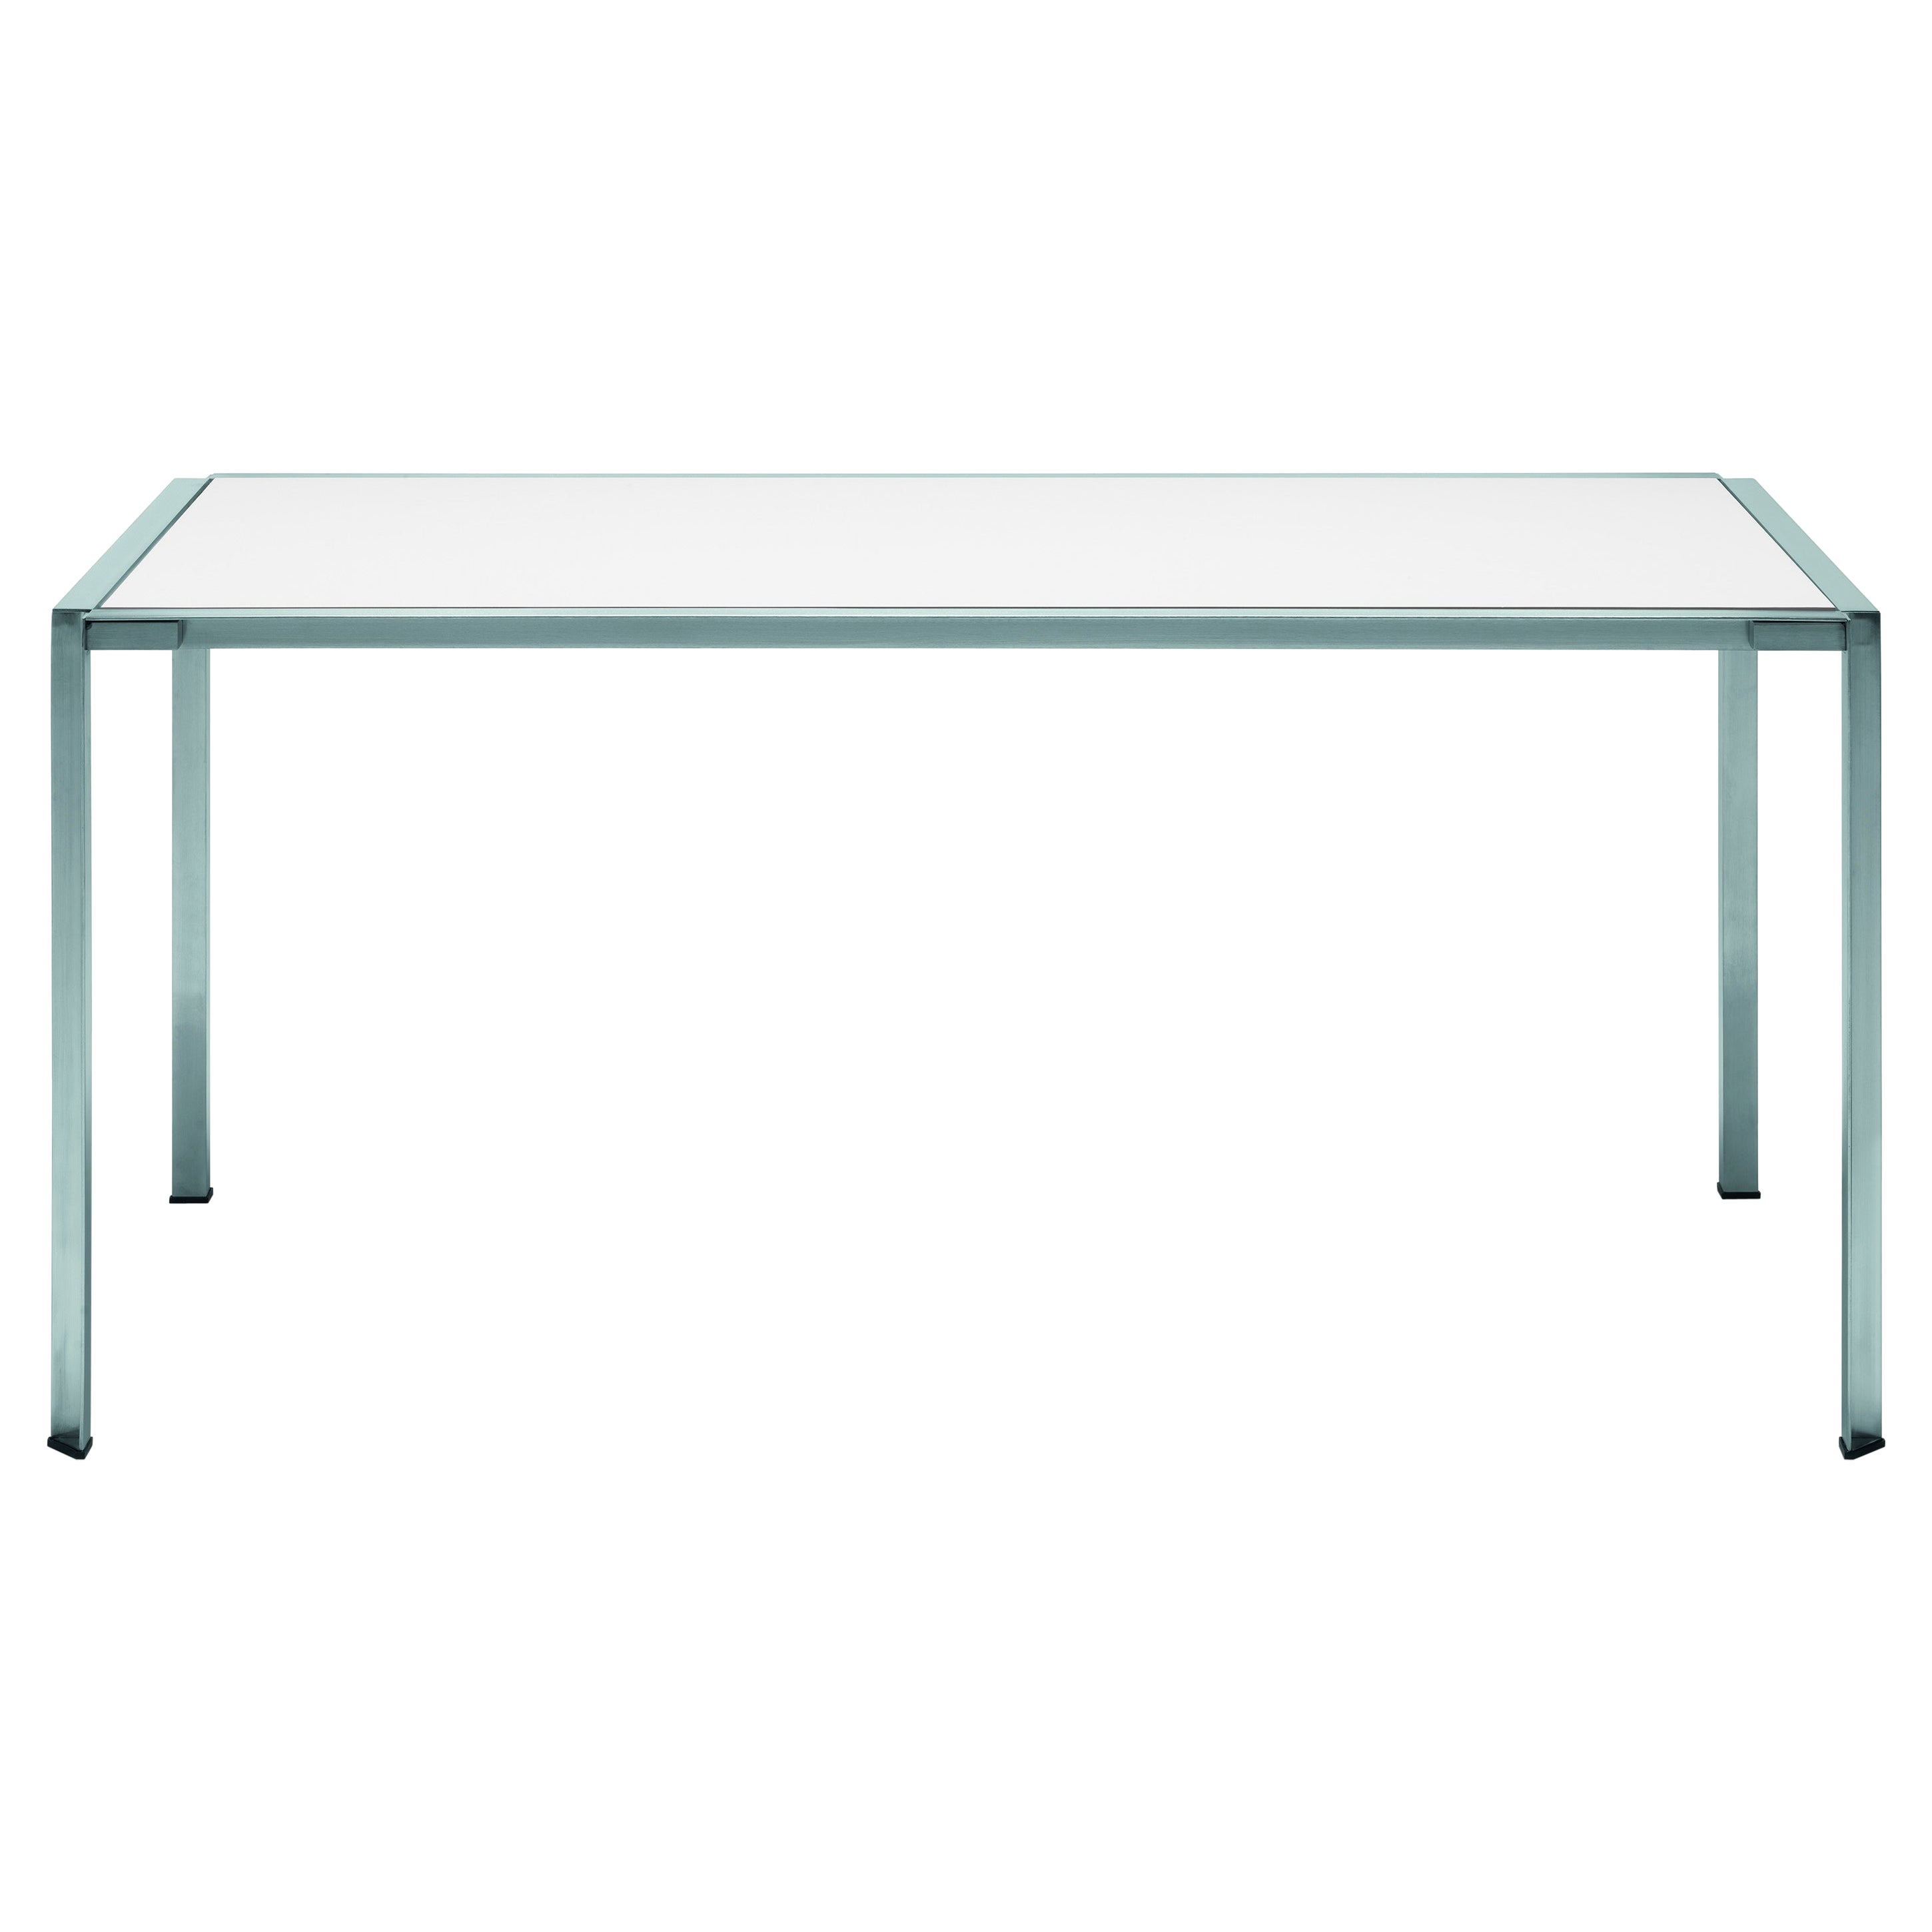 Alias 222_O Green Table with Brushed Stainless Steel Frame and Dekton Top  For Sale